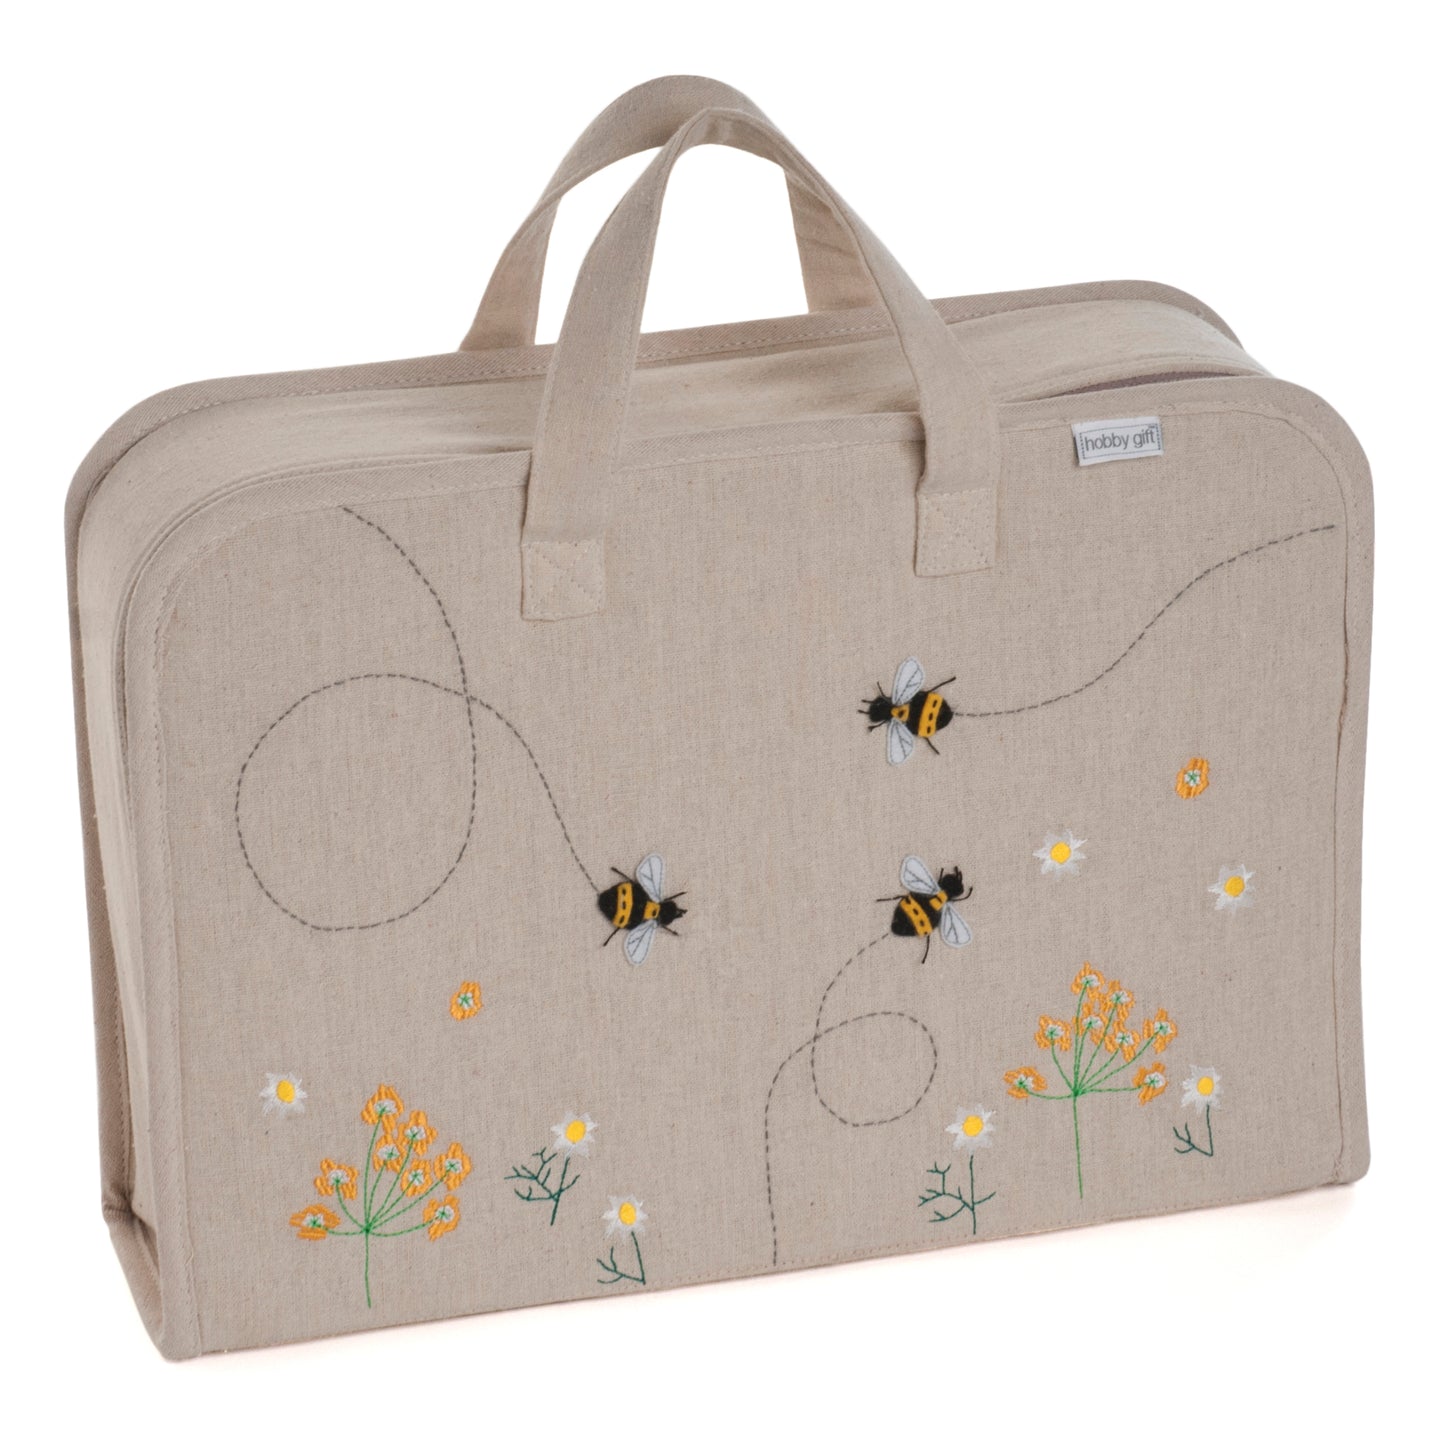 Hobby Gift Large Bee Applique Project Storage Bag